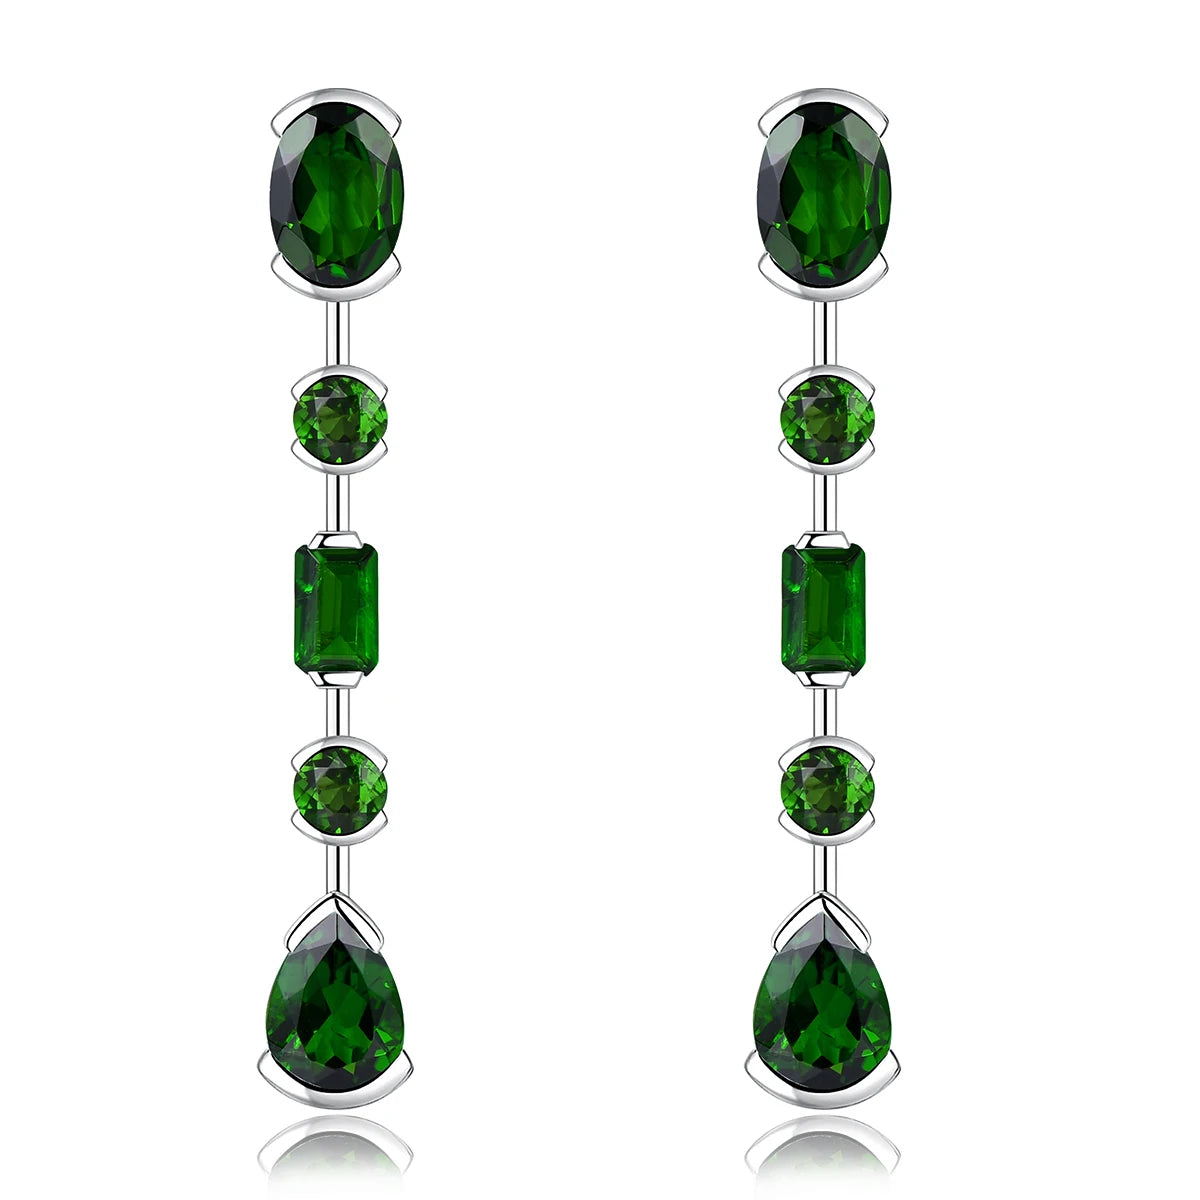 Natural Chrome Diopside Sterling Silver Drop Earrings 3.5 Carats Genuine Gemstone Exquisite Top Quality Women Birthday Gifts Natural Diopside